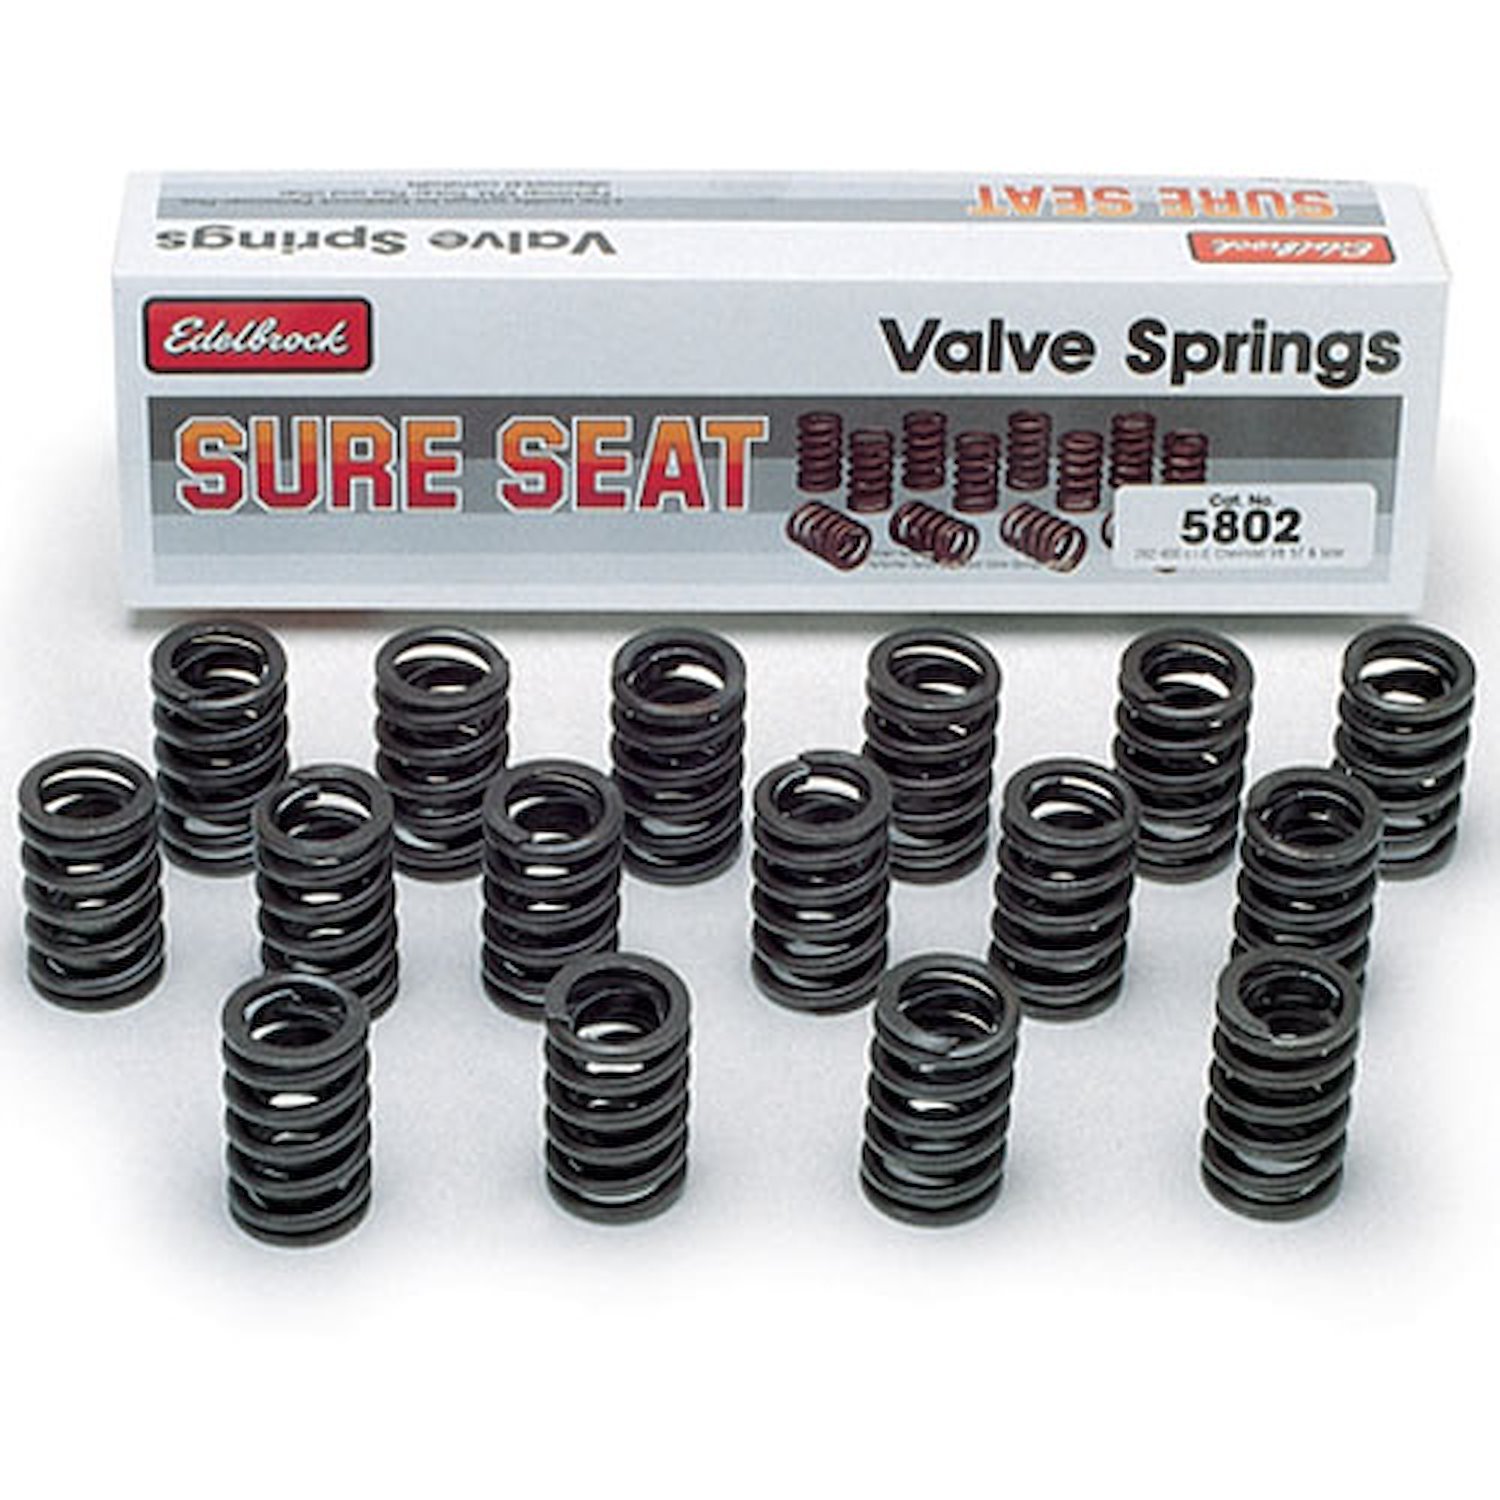 Sure Seat Valve Springs for 1957-1995 Small Block